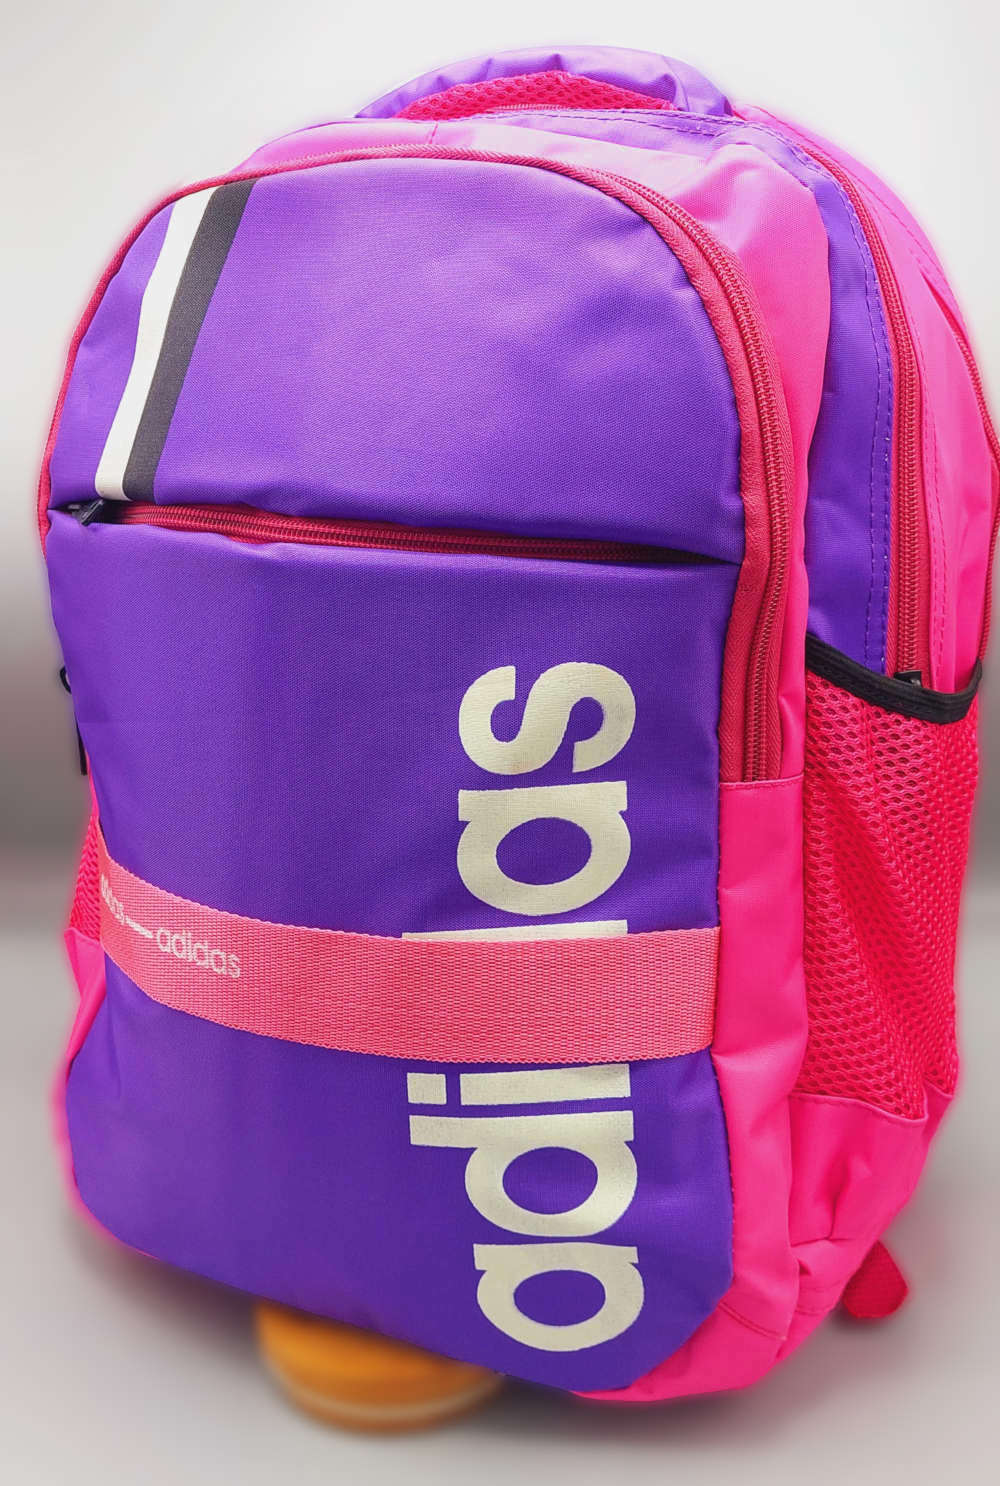 Shop for adidas School Bags & Backpacks for Girls & Boys Online in UAE at  FirstCry.ae